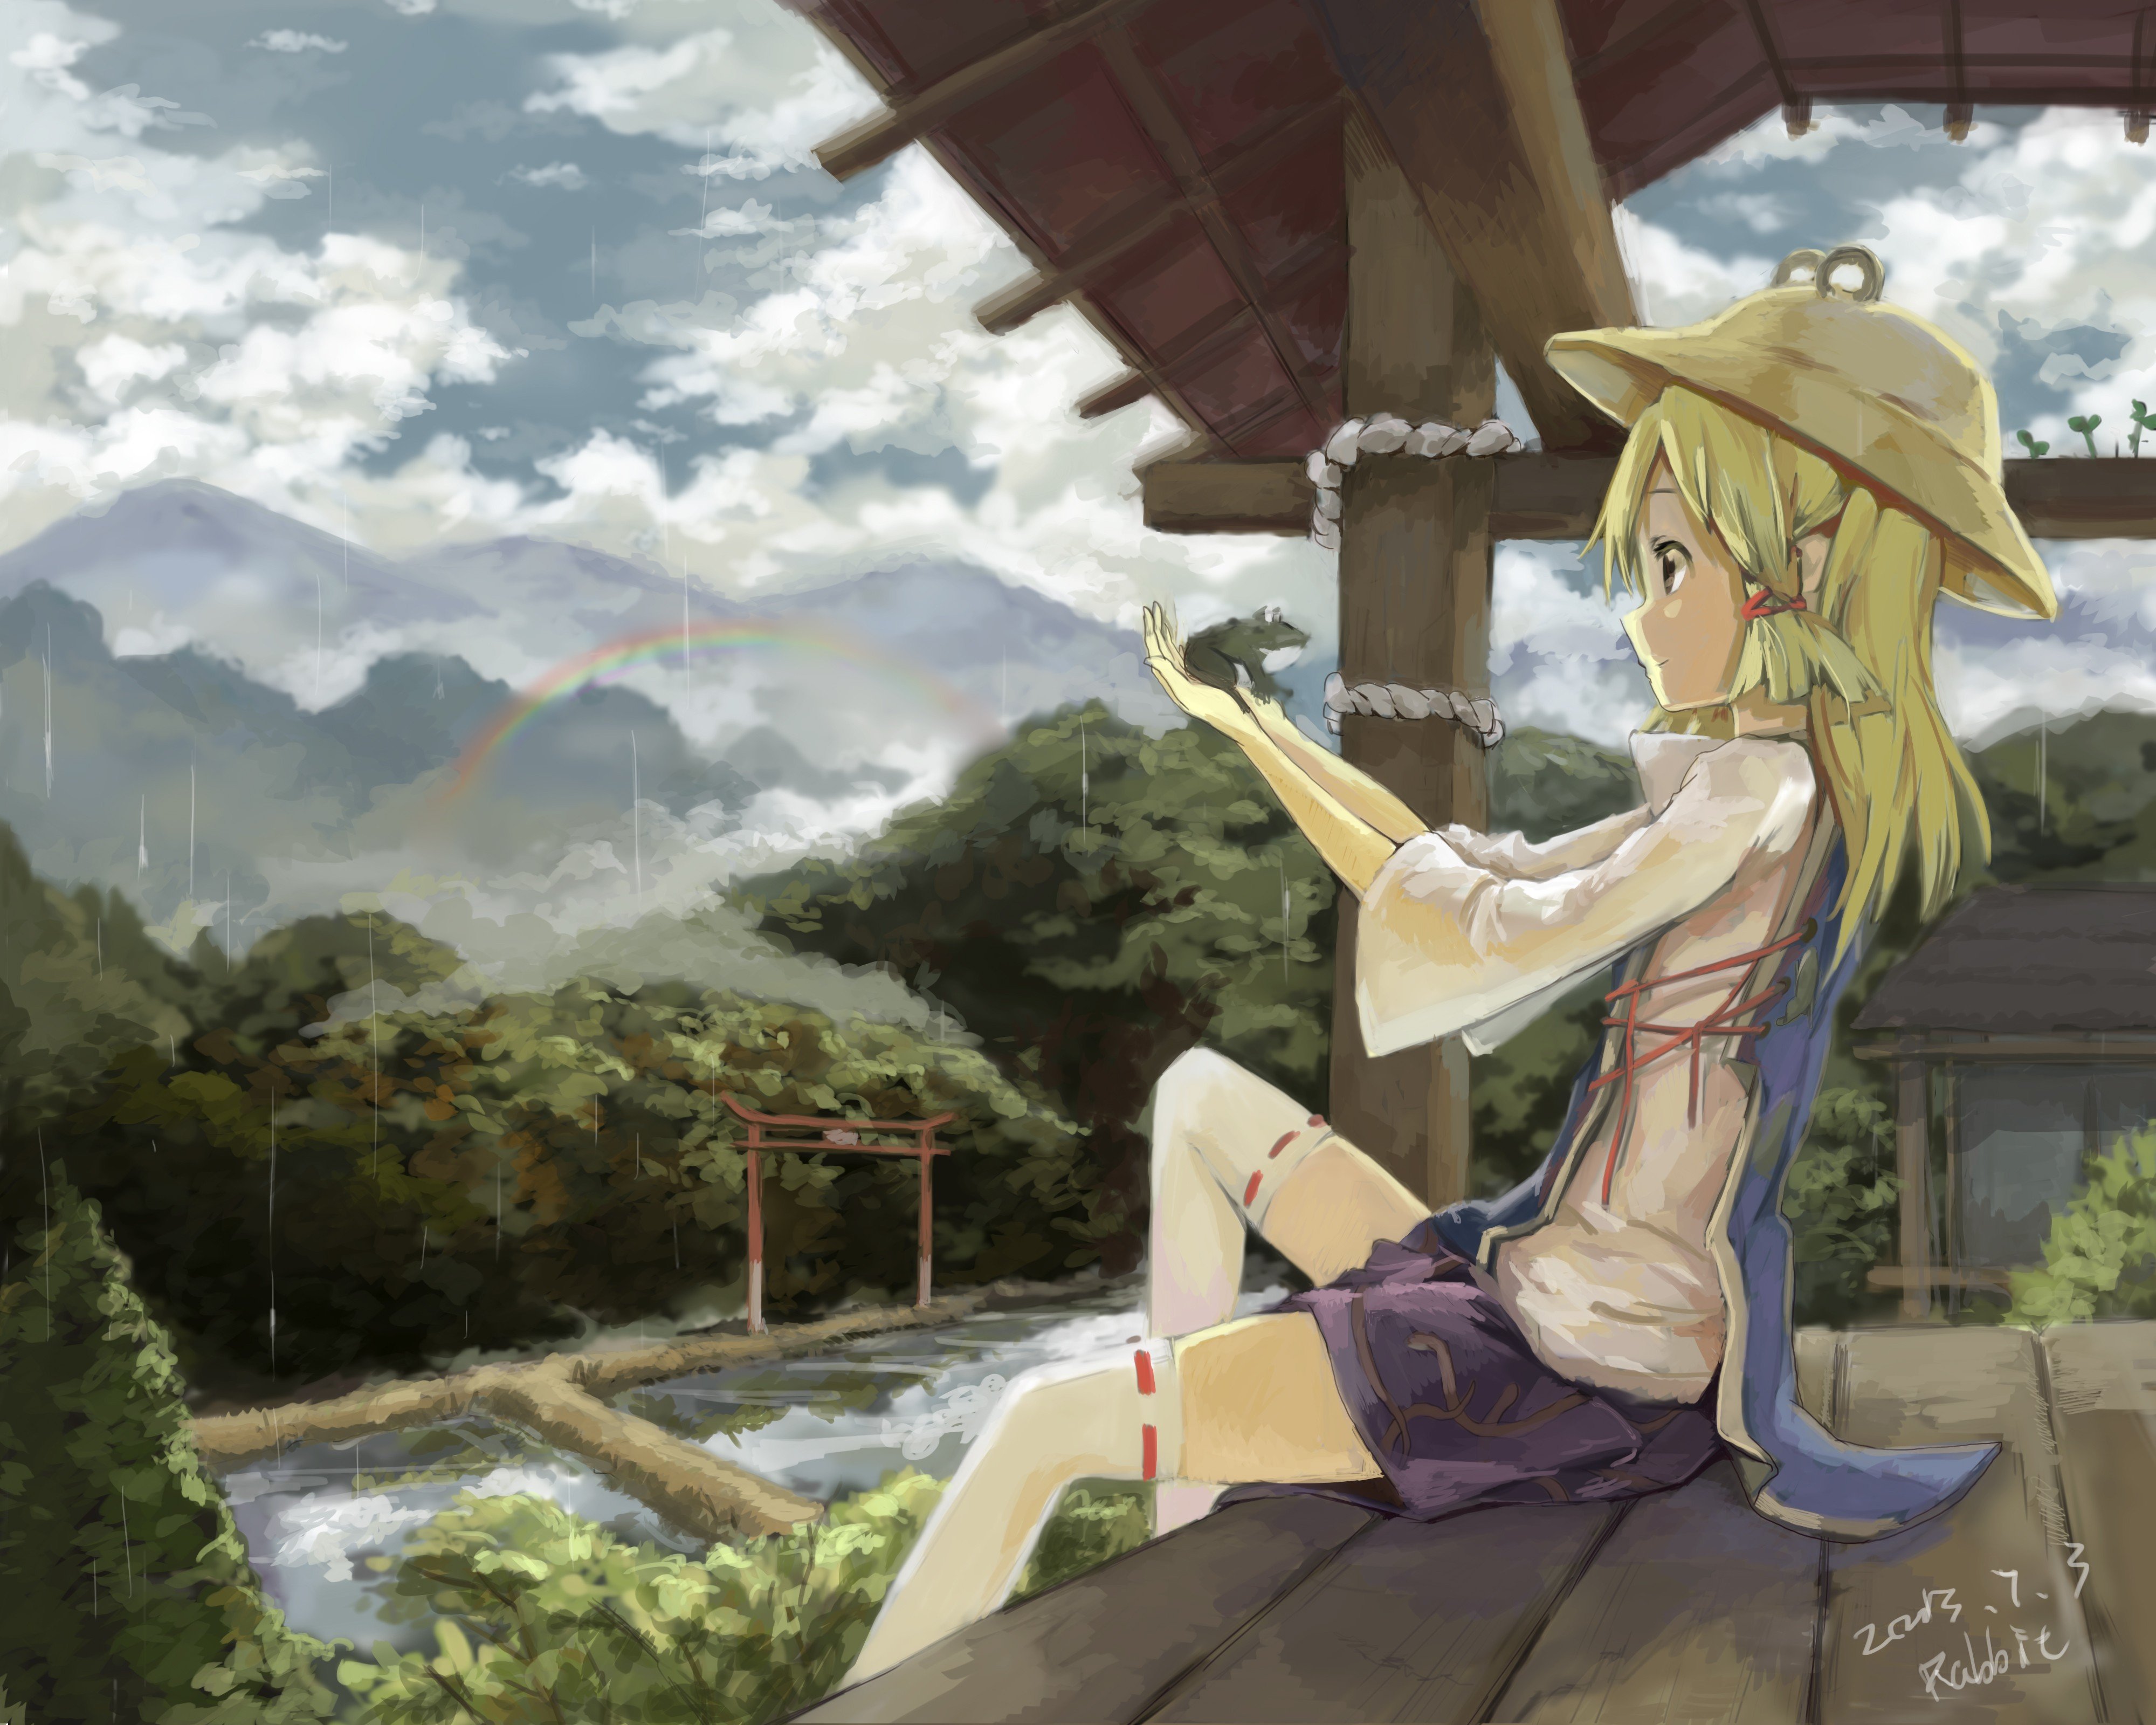 blondes, Water, Video, Games, Mountains, Clouds, Landscapes, Touhou, Trees, Rain, Stockings, Animals, Skirts, Long, Hair, Ribbons, Buildings, Brown, Eyes, Goddess, Rainbows, Thigh, Highs, Frogs, Scenic, Moriya, Wallpaper